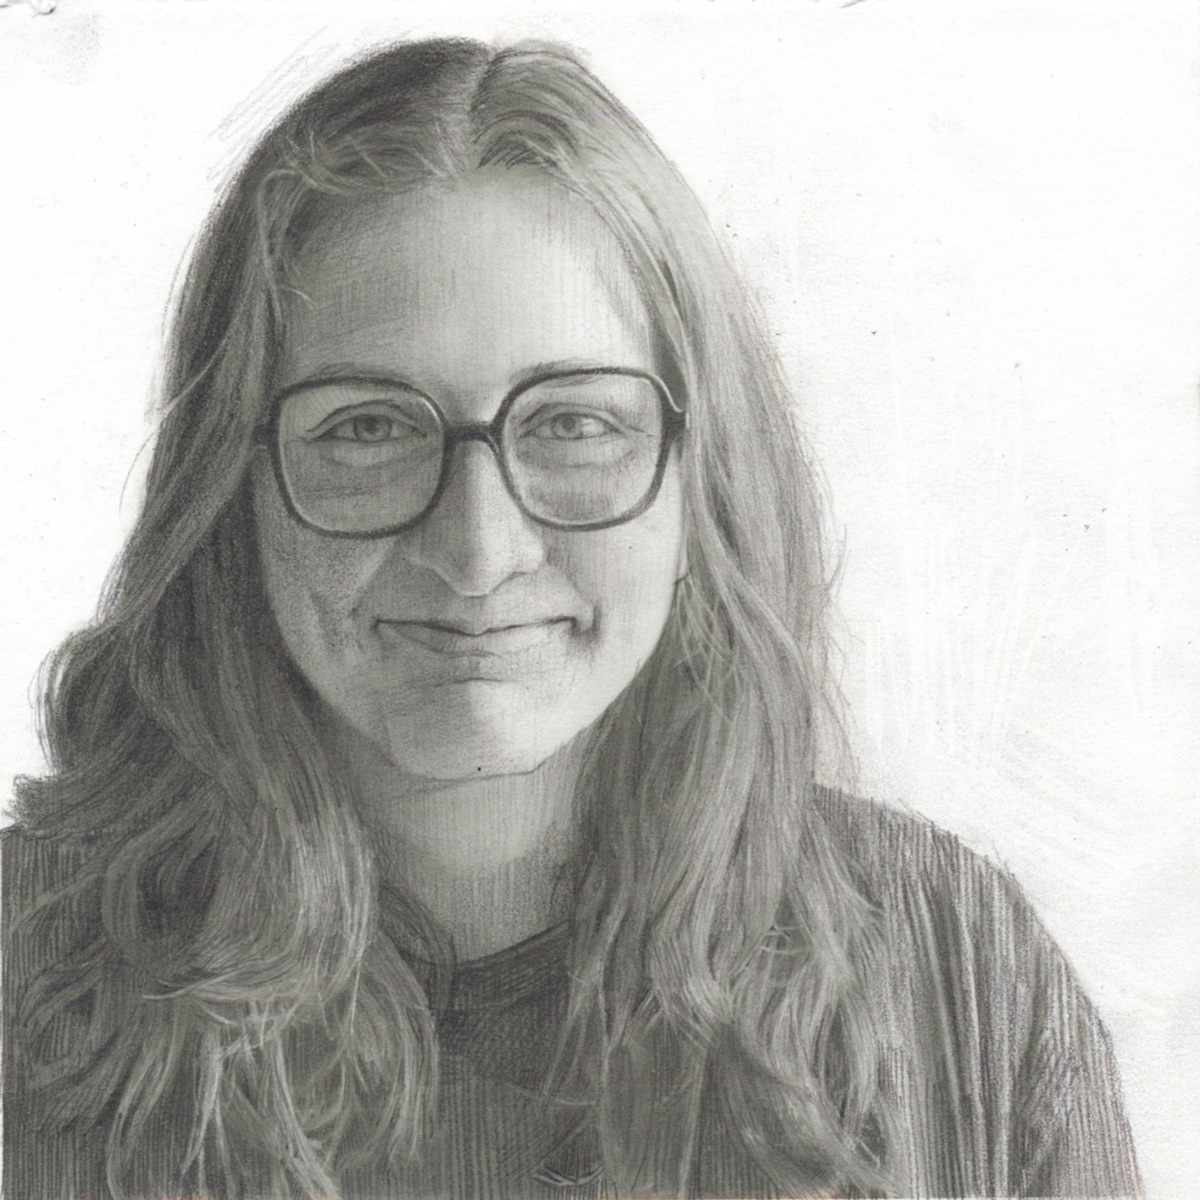 Pencil drawing of a woman with glasses and long hair smirking.